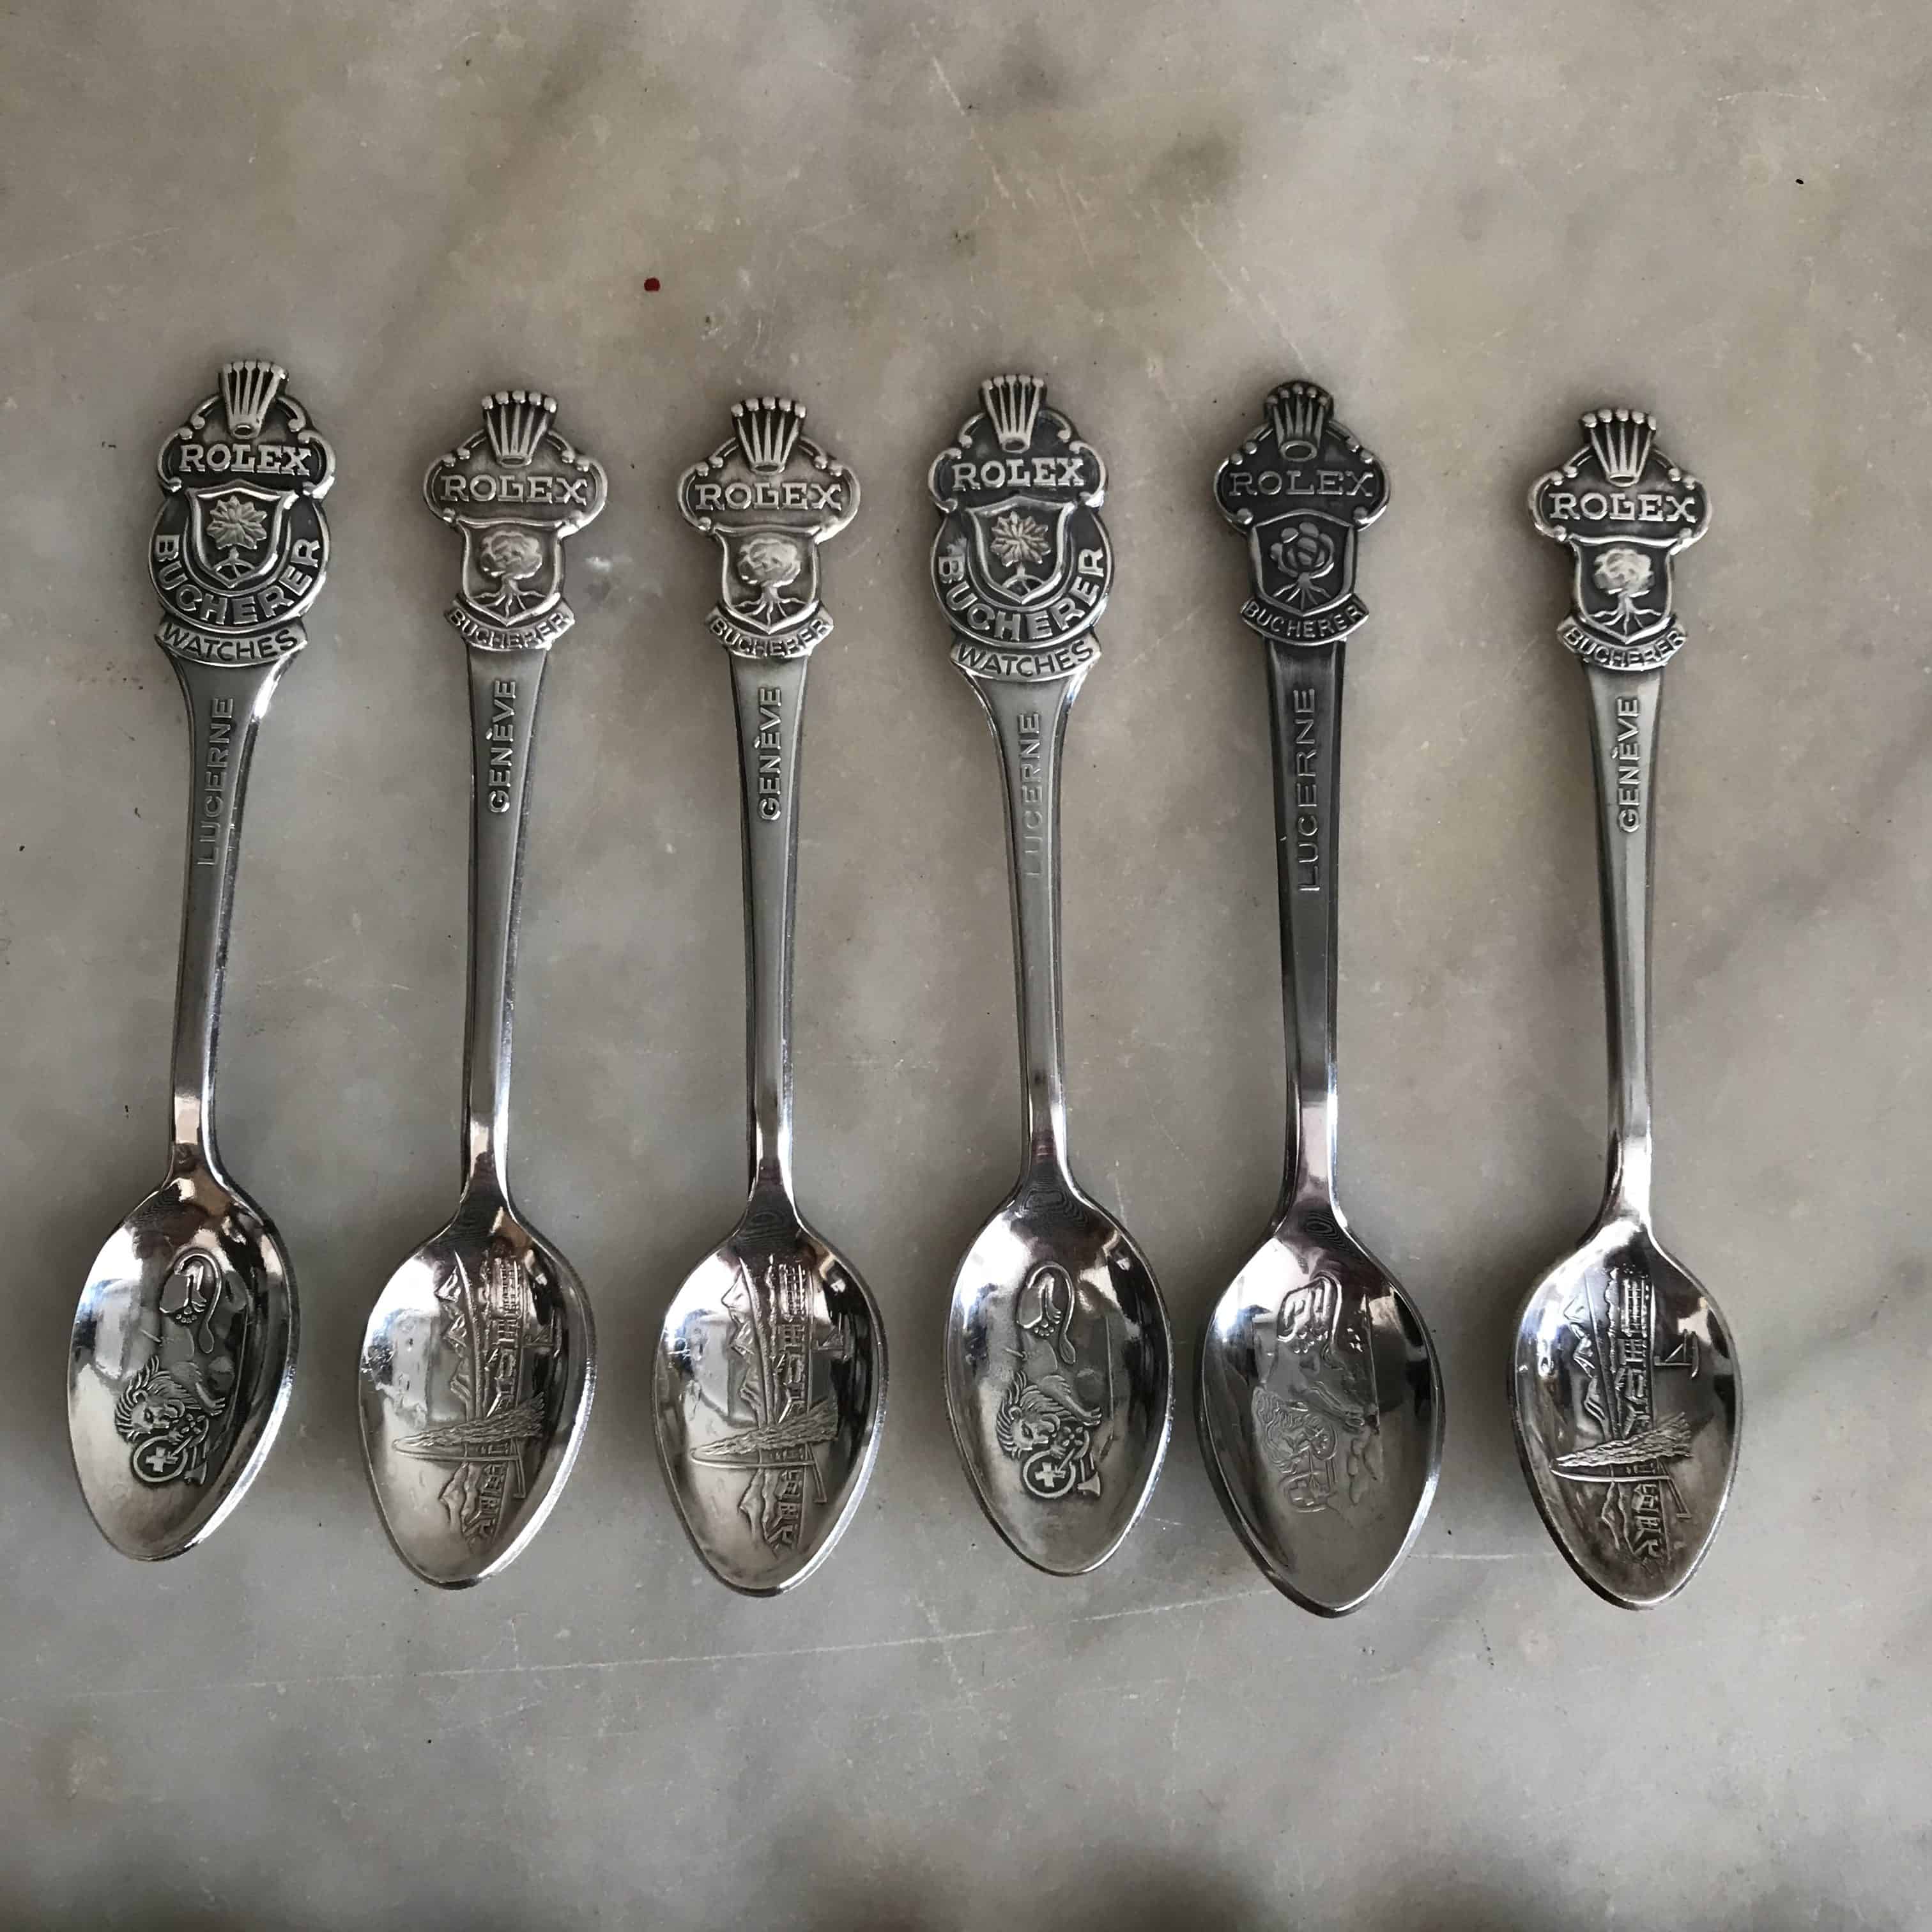 rolex spoons history